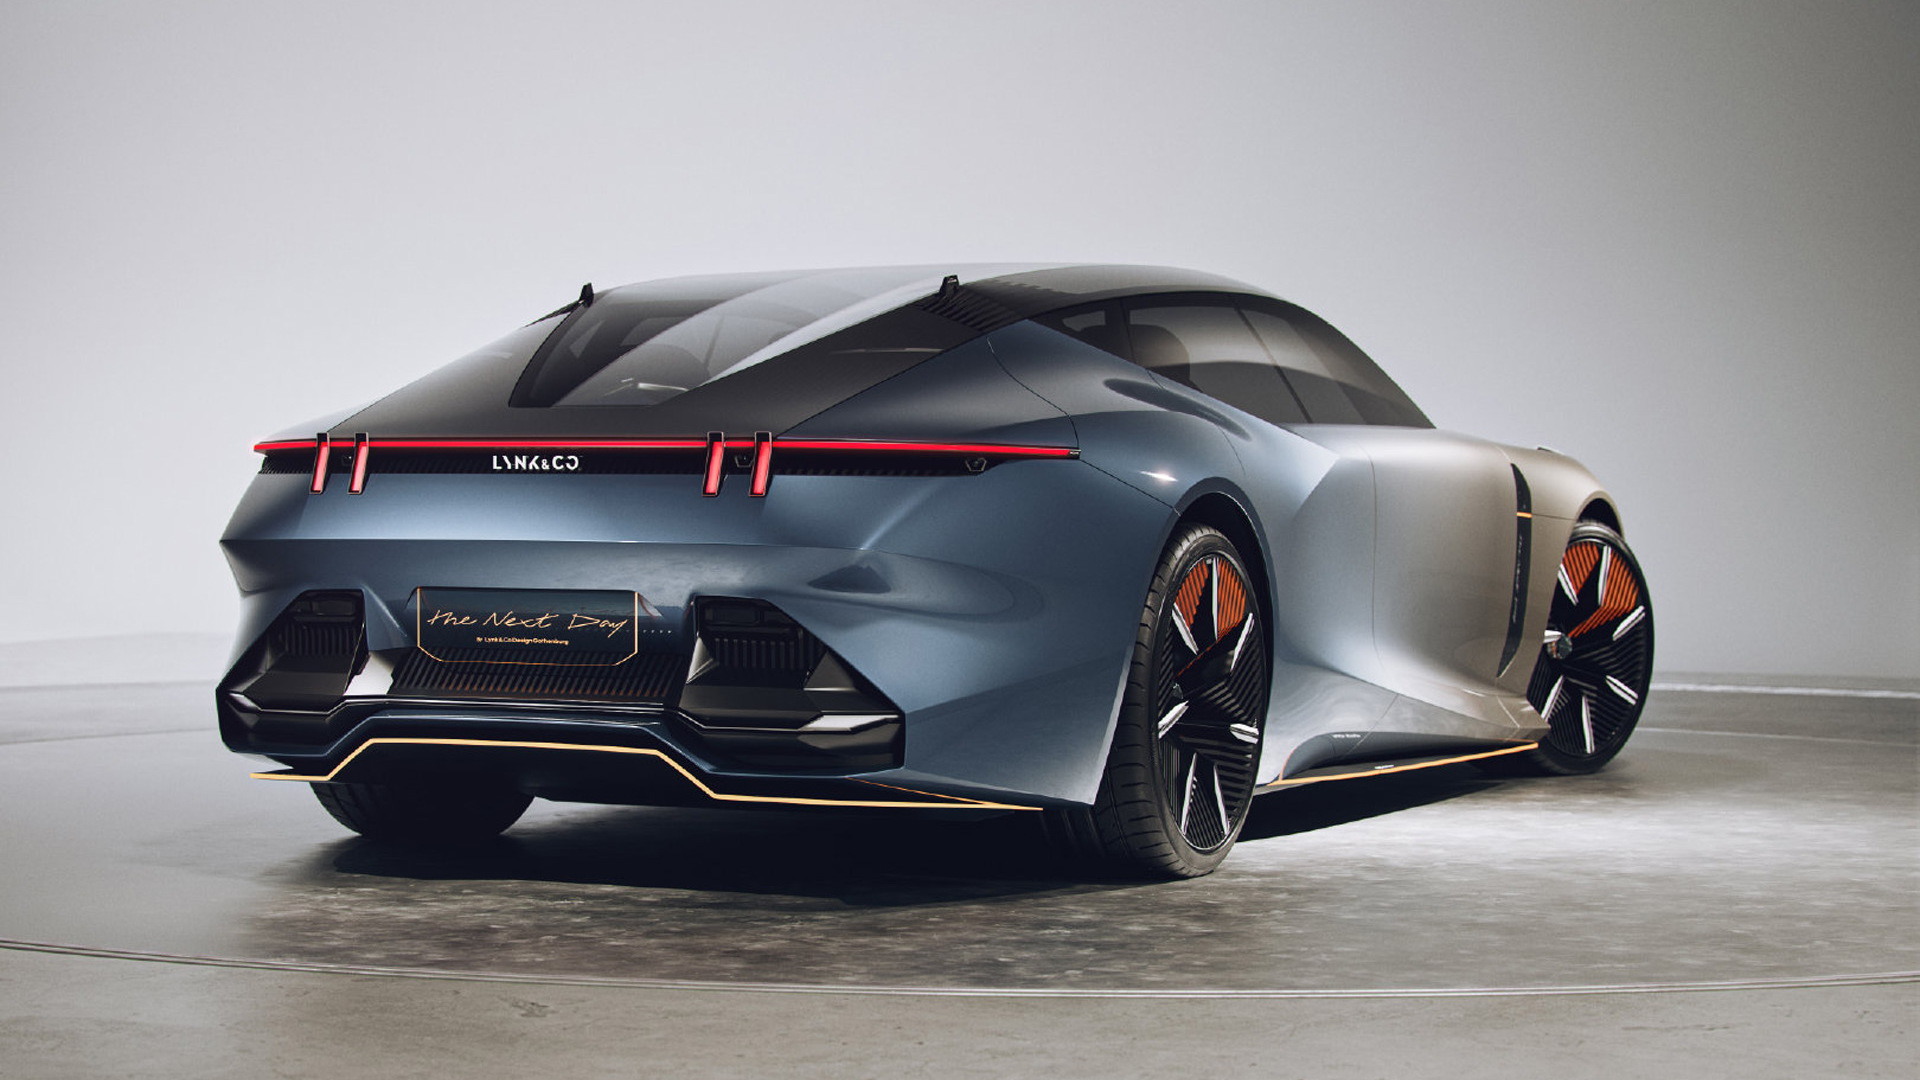 Lynk & Co. The Next Day concept